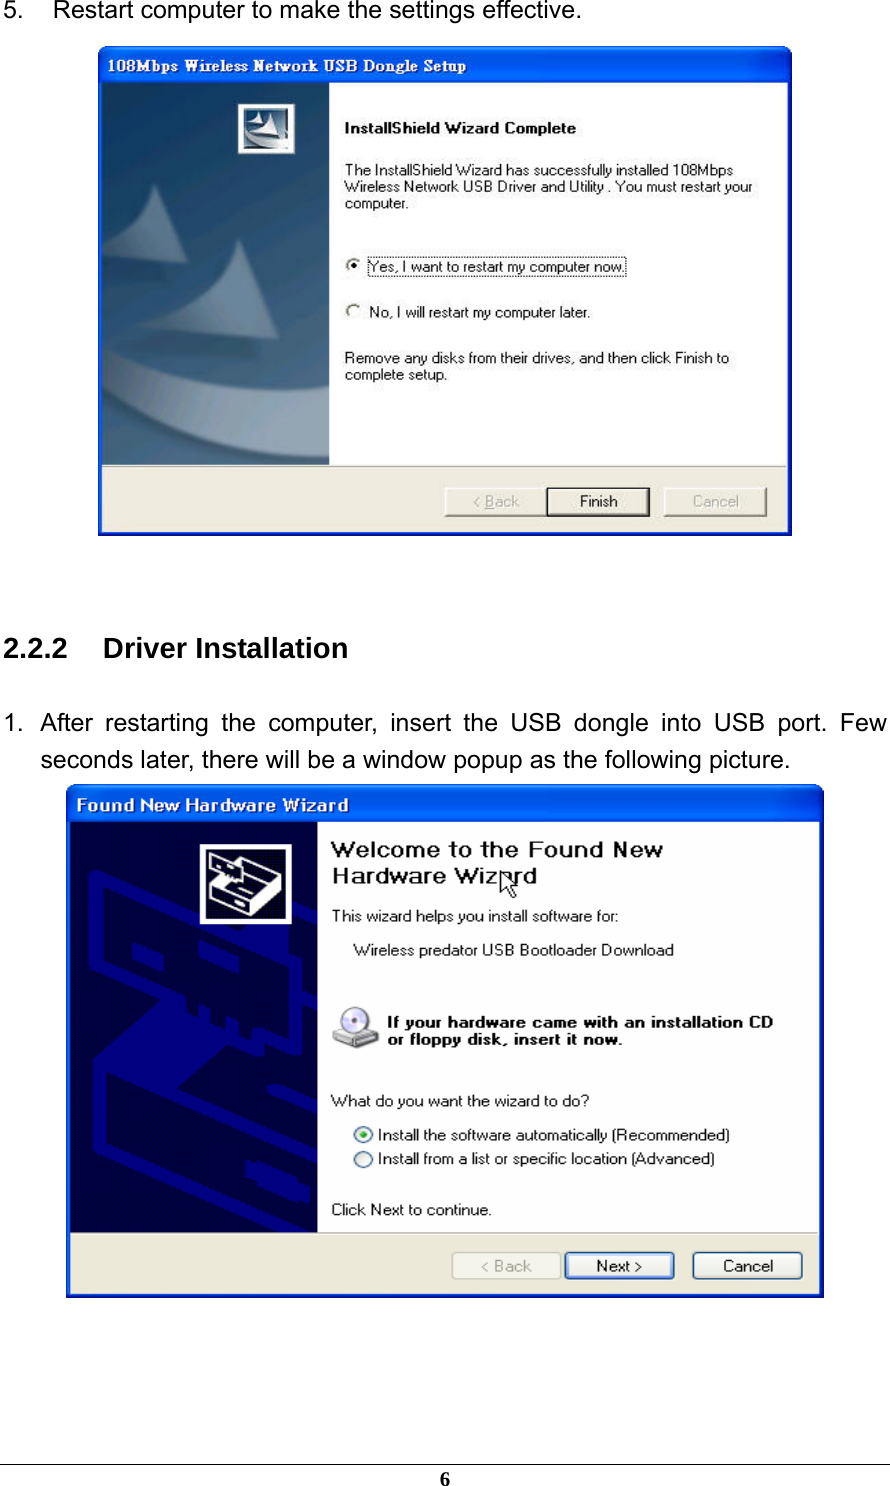  5.  Restart computer to make the settings effective.   2.2.2 Driver Installation 1.  After restarting the computer, insert the USB dongle into USB port. Few seconds later, there will be a window popup as the following picture.       6 